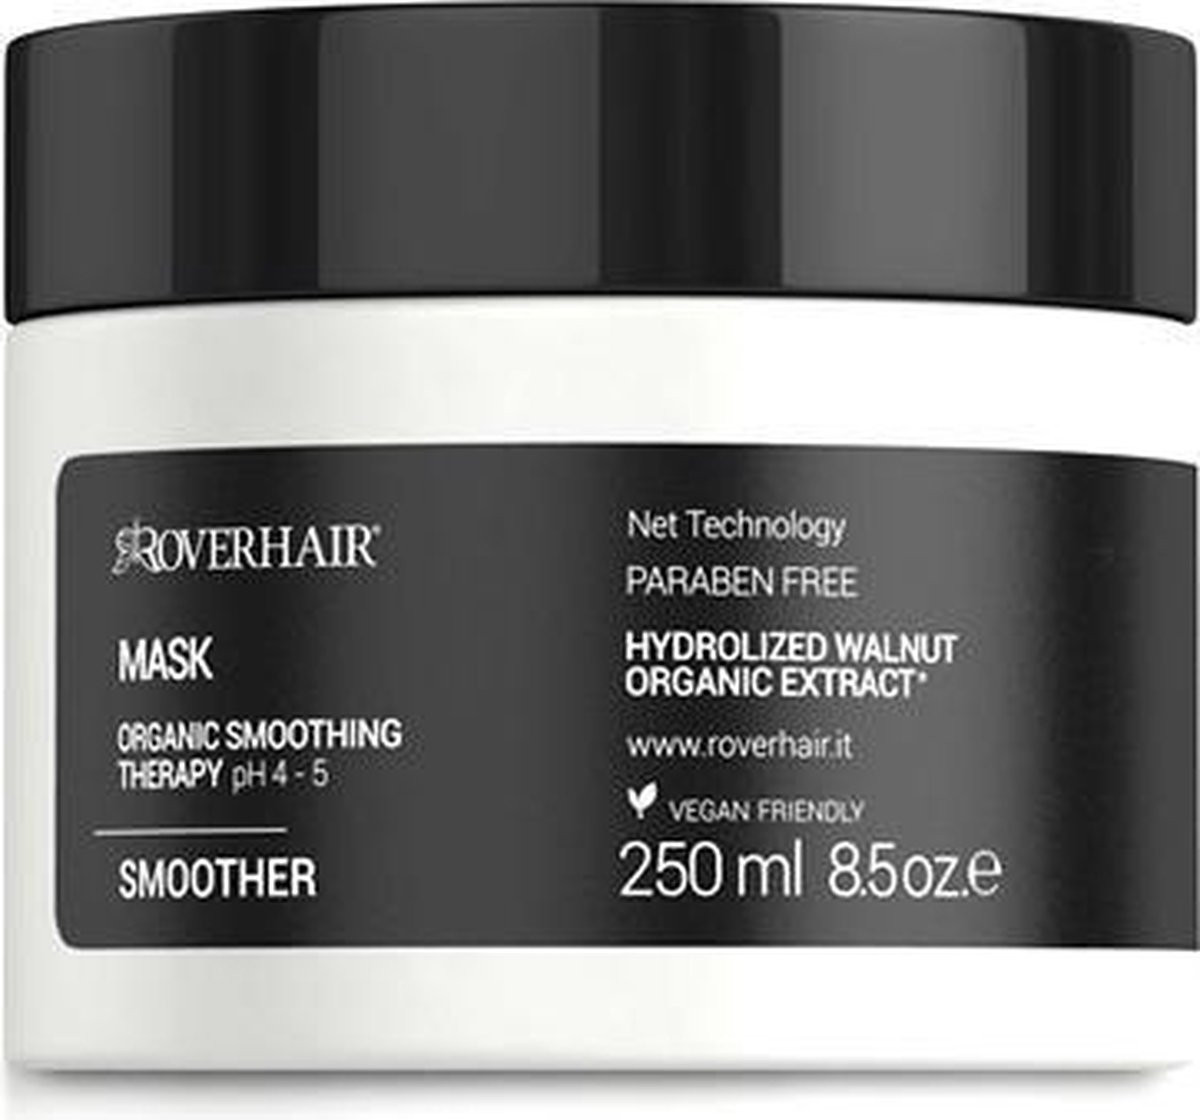 Roverhair Smoother Organic Smoothing Therapy Mask Masker 250ml